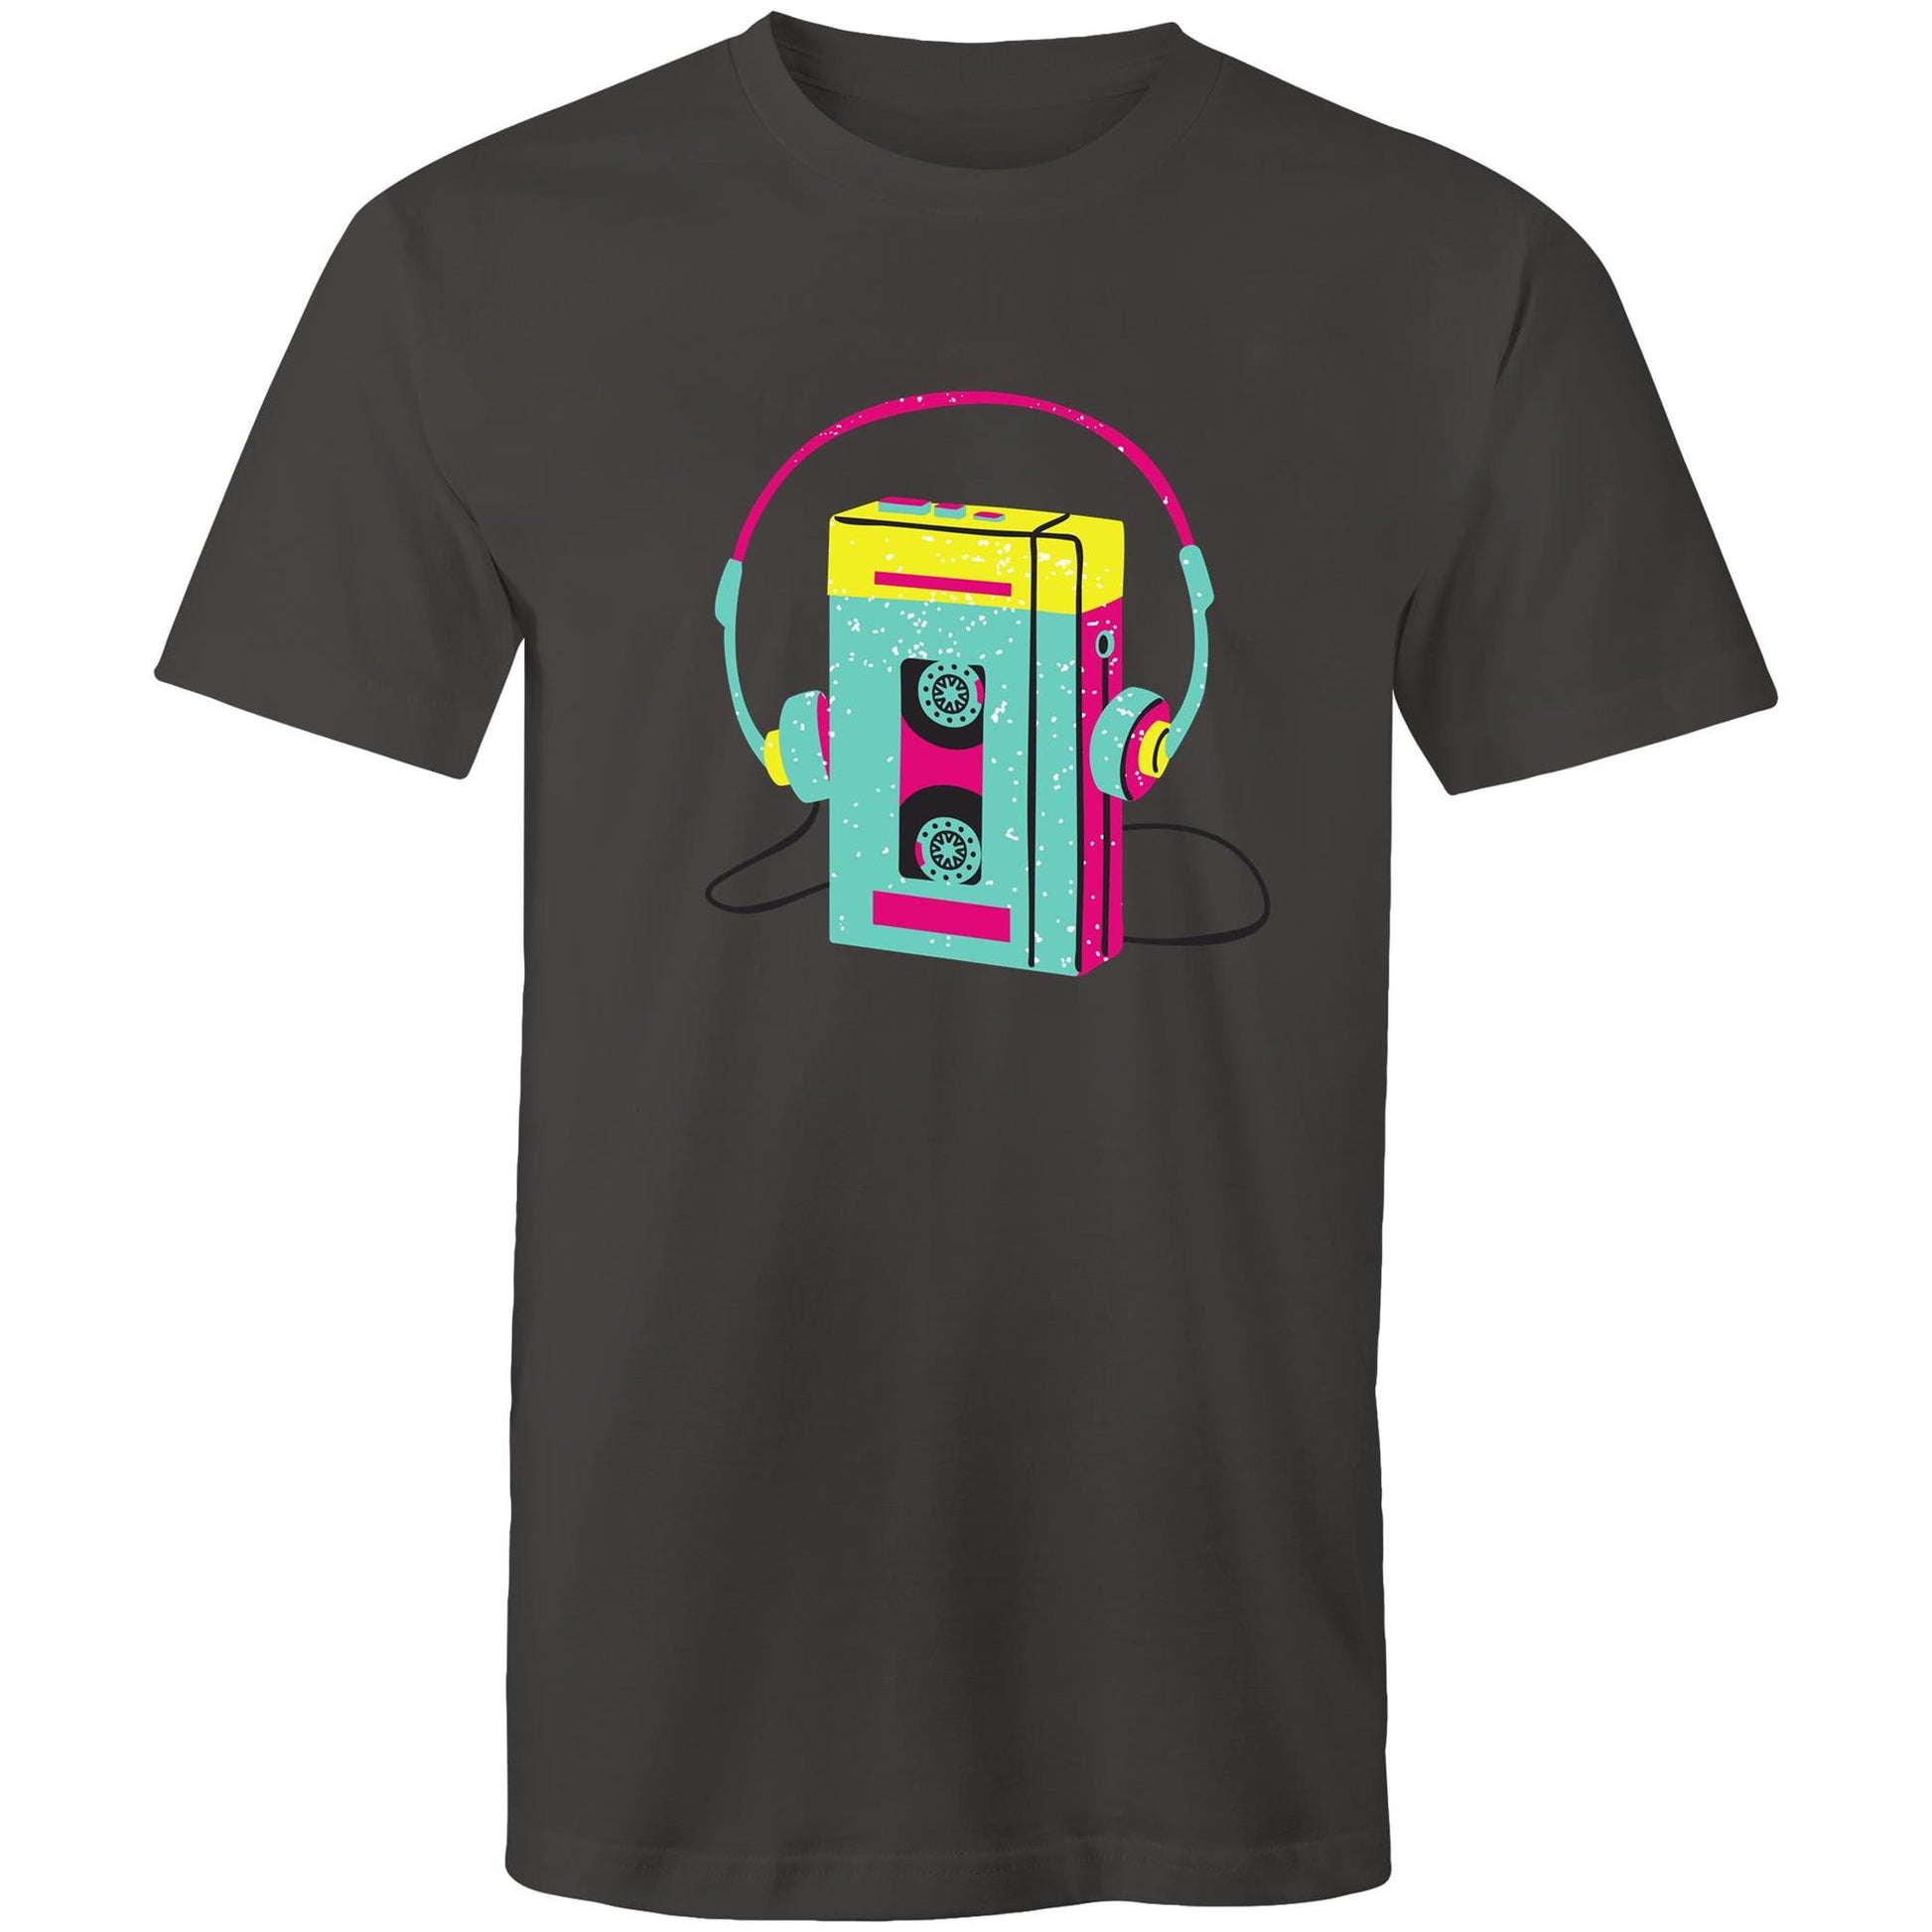 Wired For Sound, Music Player - Mens T-Shirt Charcoal Mens T-shirt Mens Music Retro